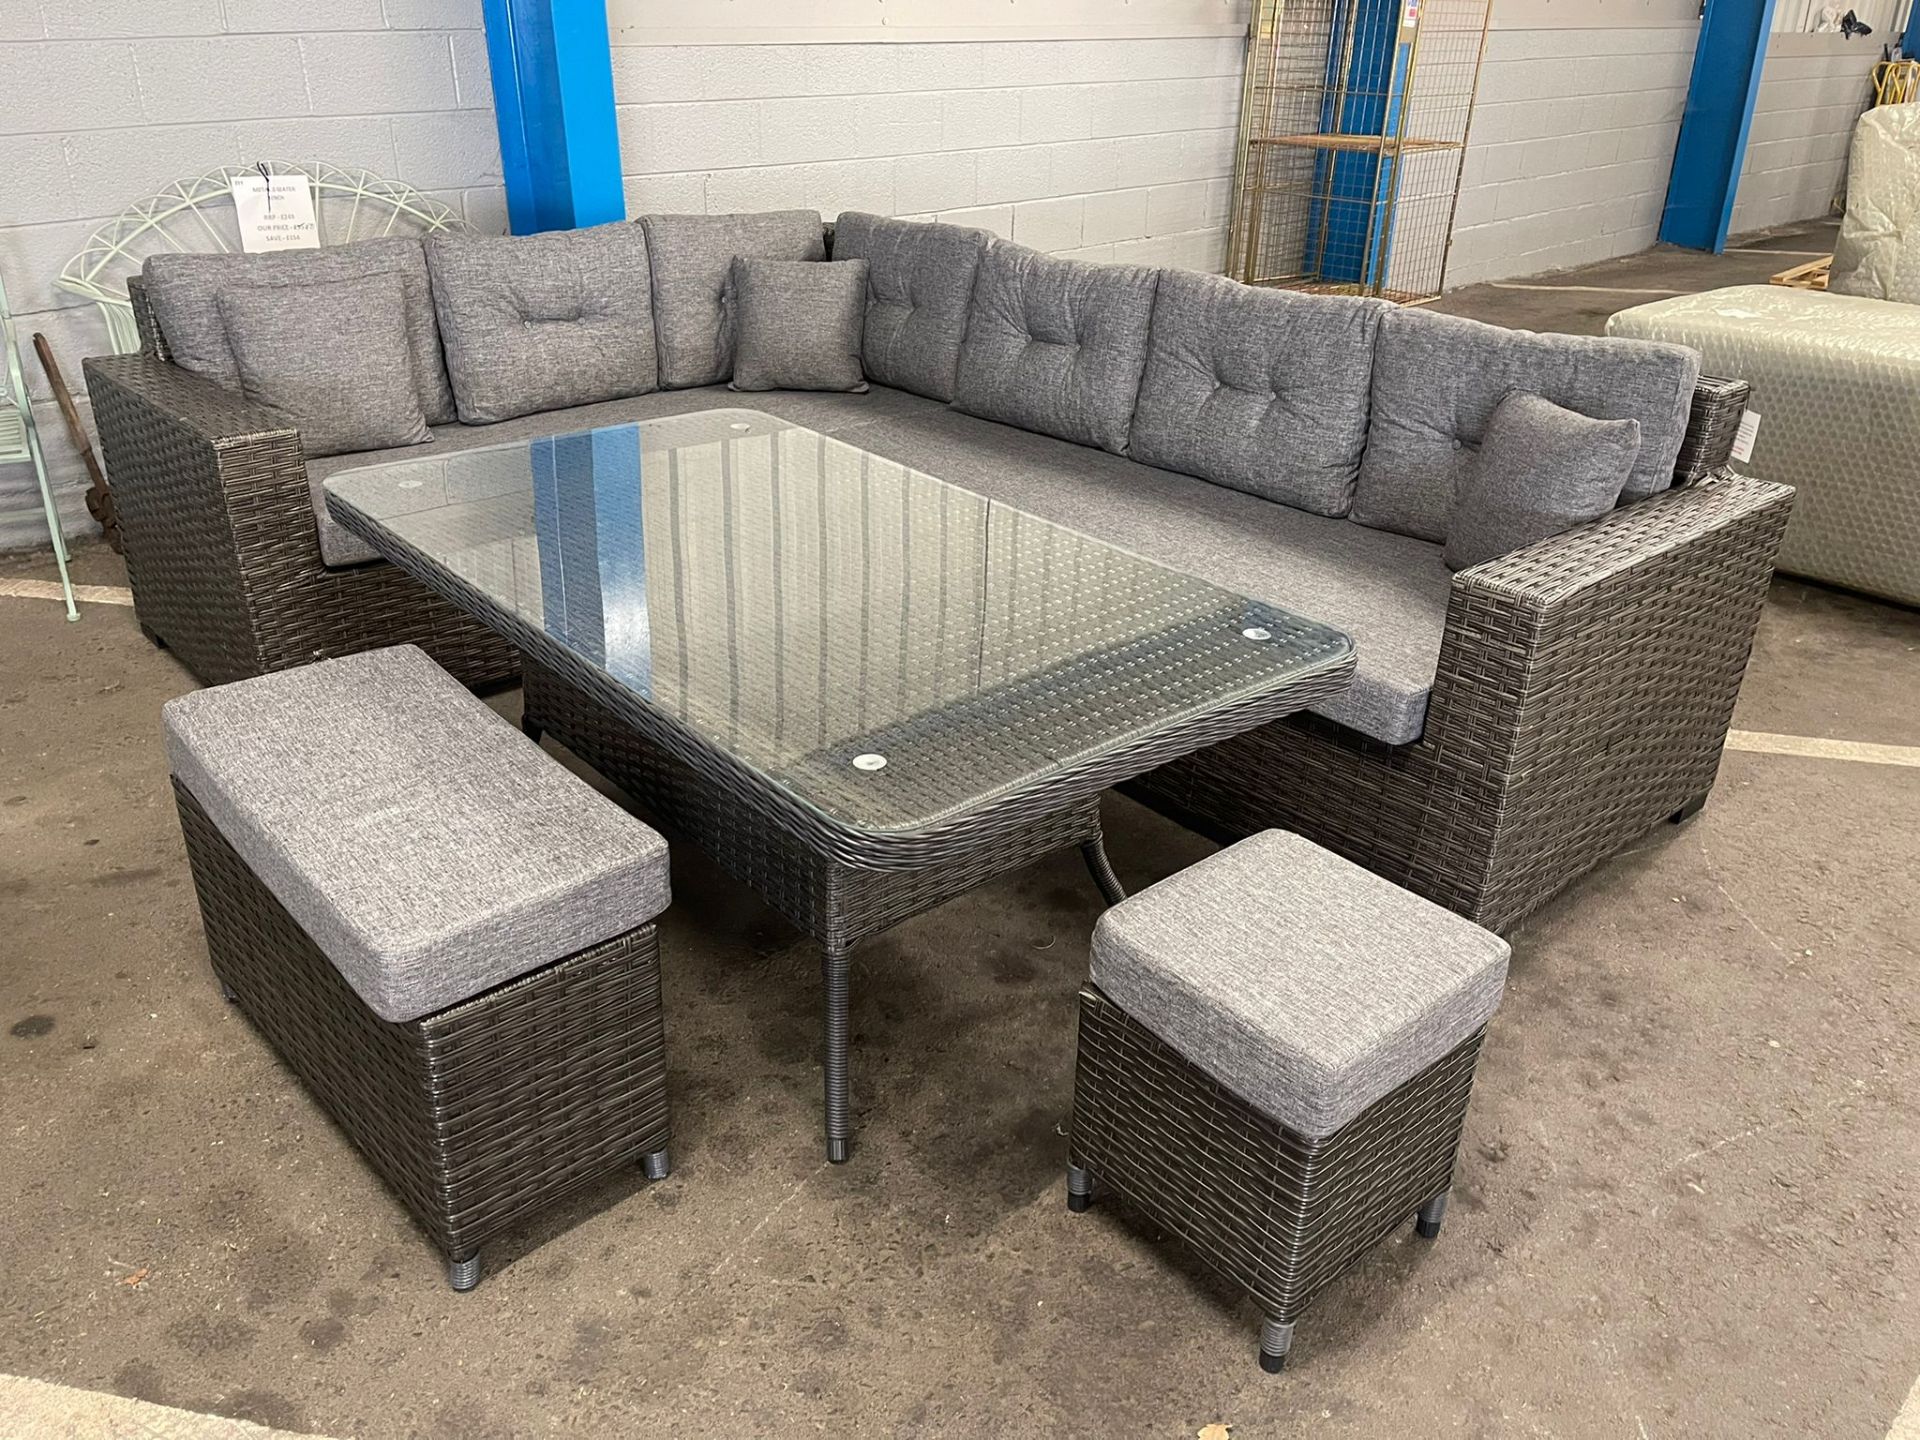 SRP £2750 - New Grey Eight Seater Sofa Set With Dining Table & Two Stools - LAST ONE - COLLECTION